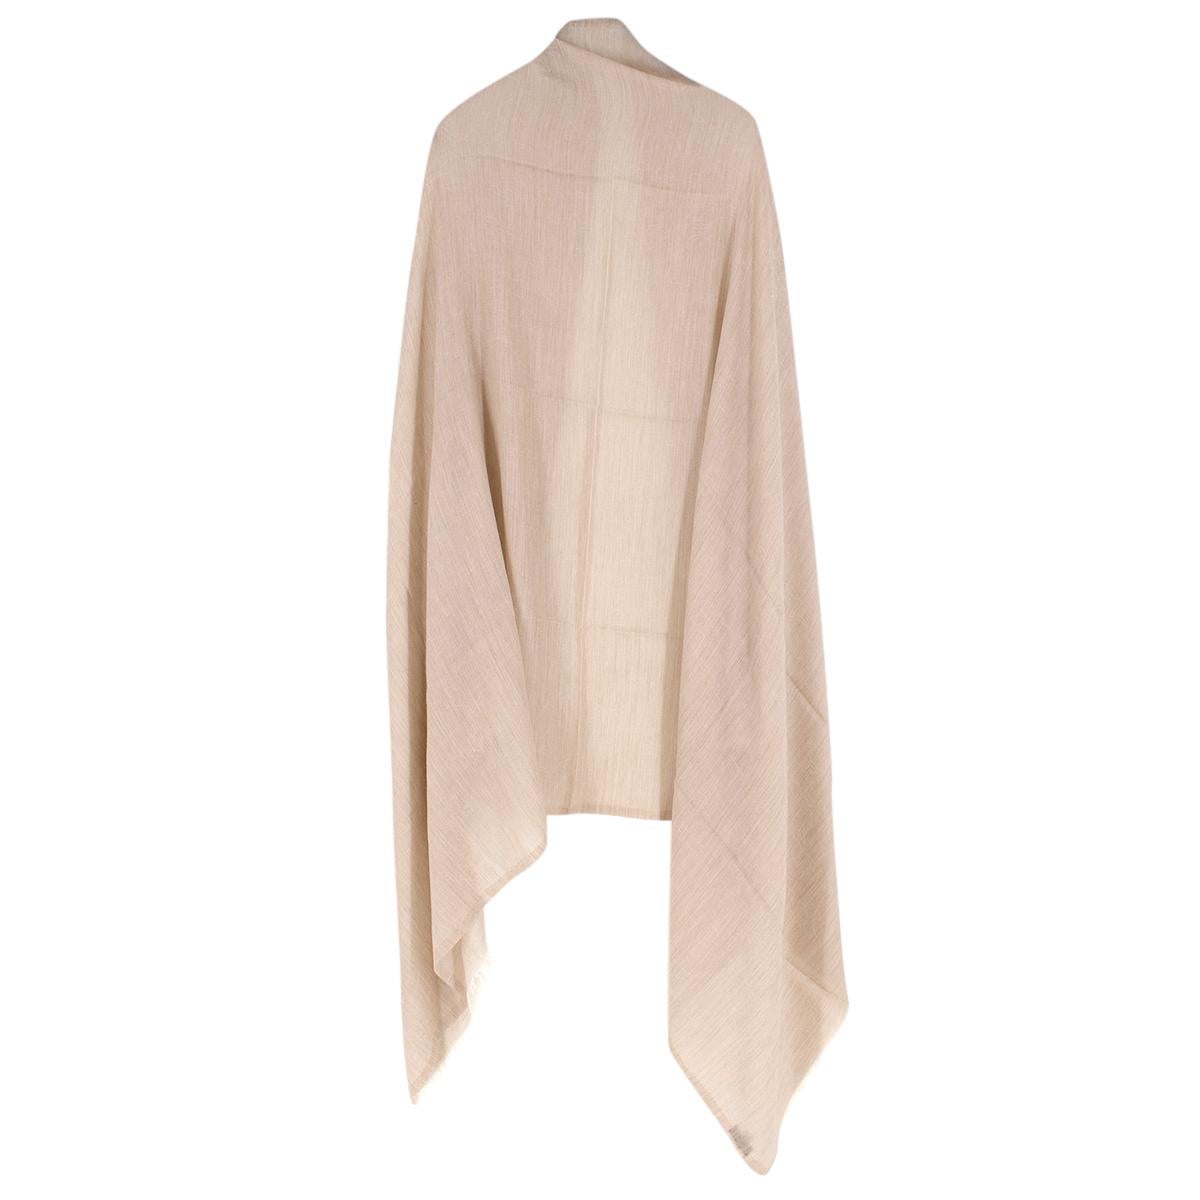 Chanel Beige Cashmere Camelia Scarf 

-Beige scarf with light camelia flower print
-Features raw hem detailing
-'CC' embroidered logo

Please note, these items are pre-owned and may show signs of being stored even when unworn and unused. This is